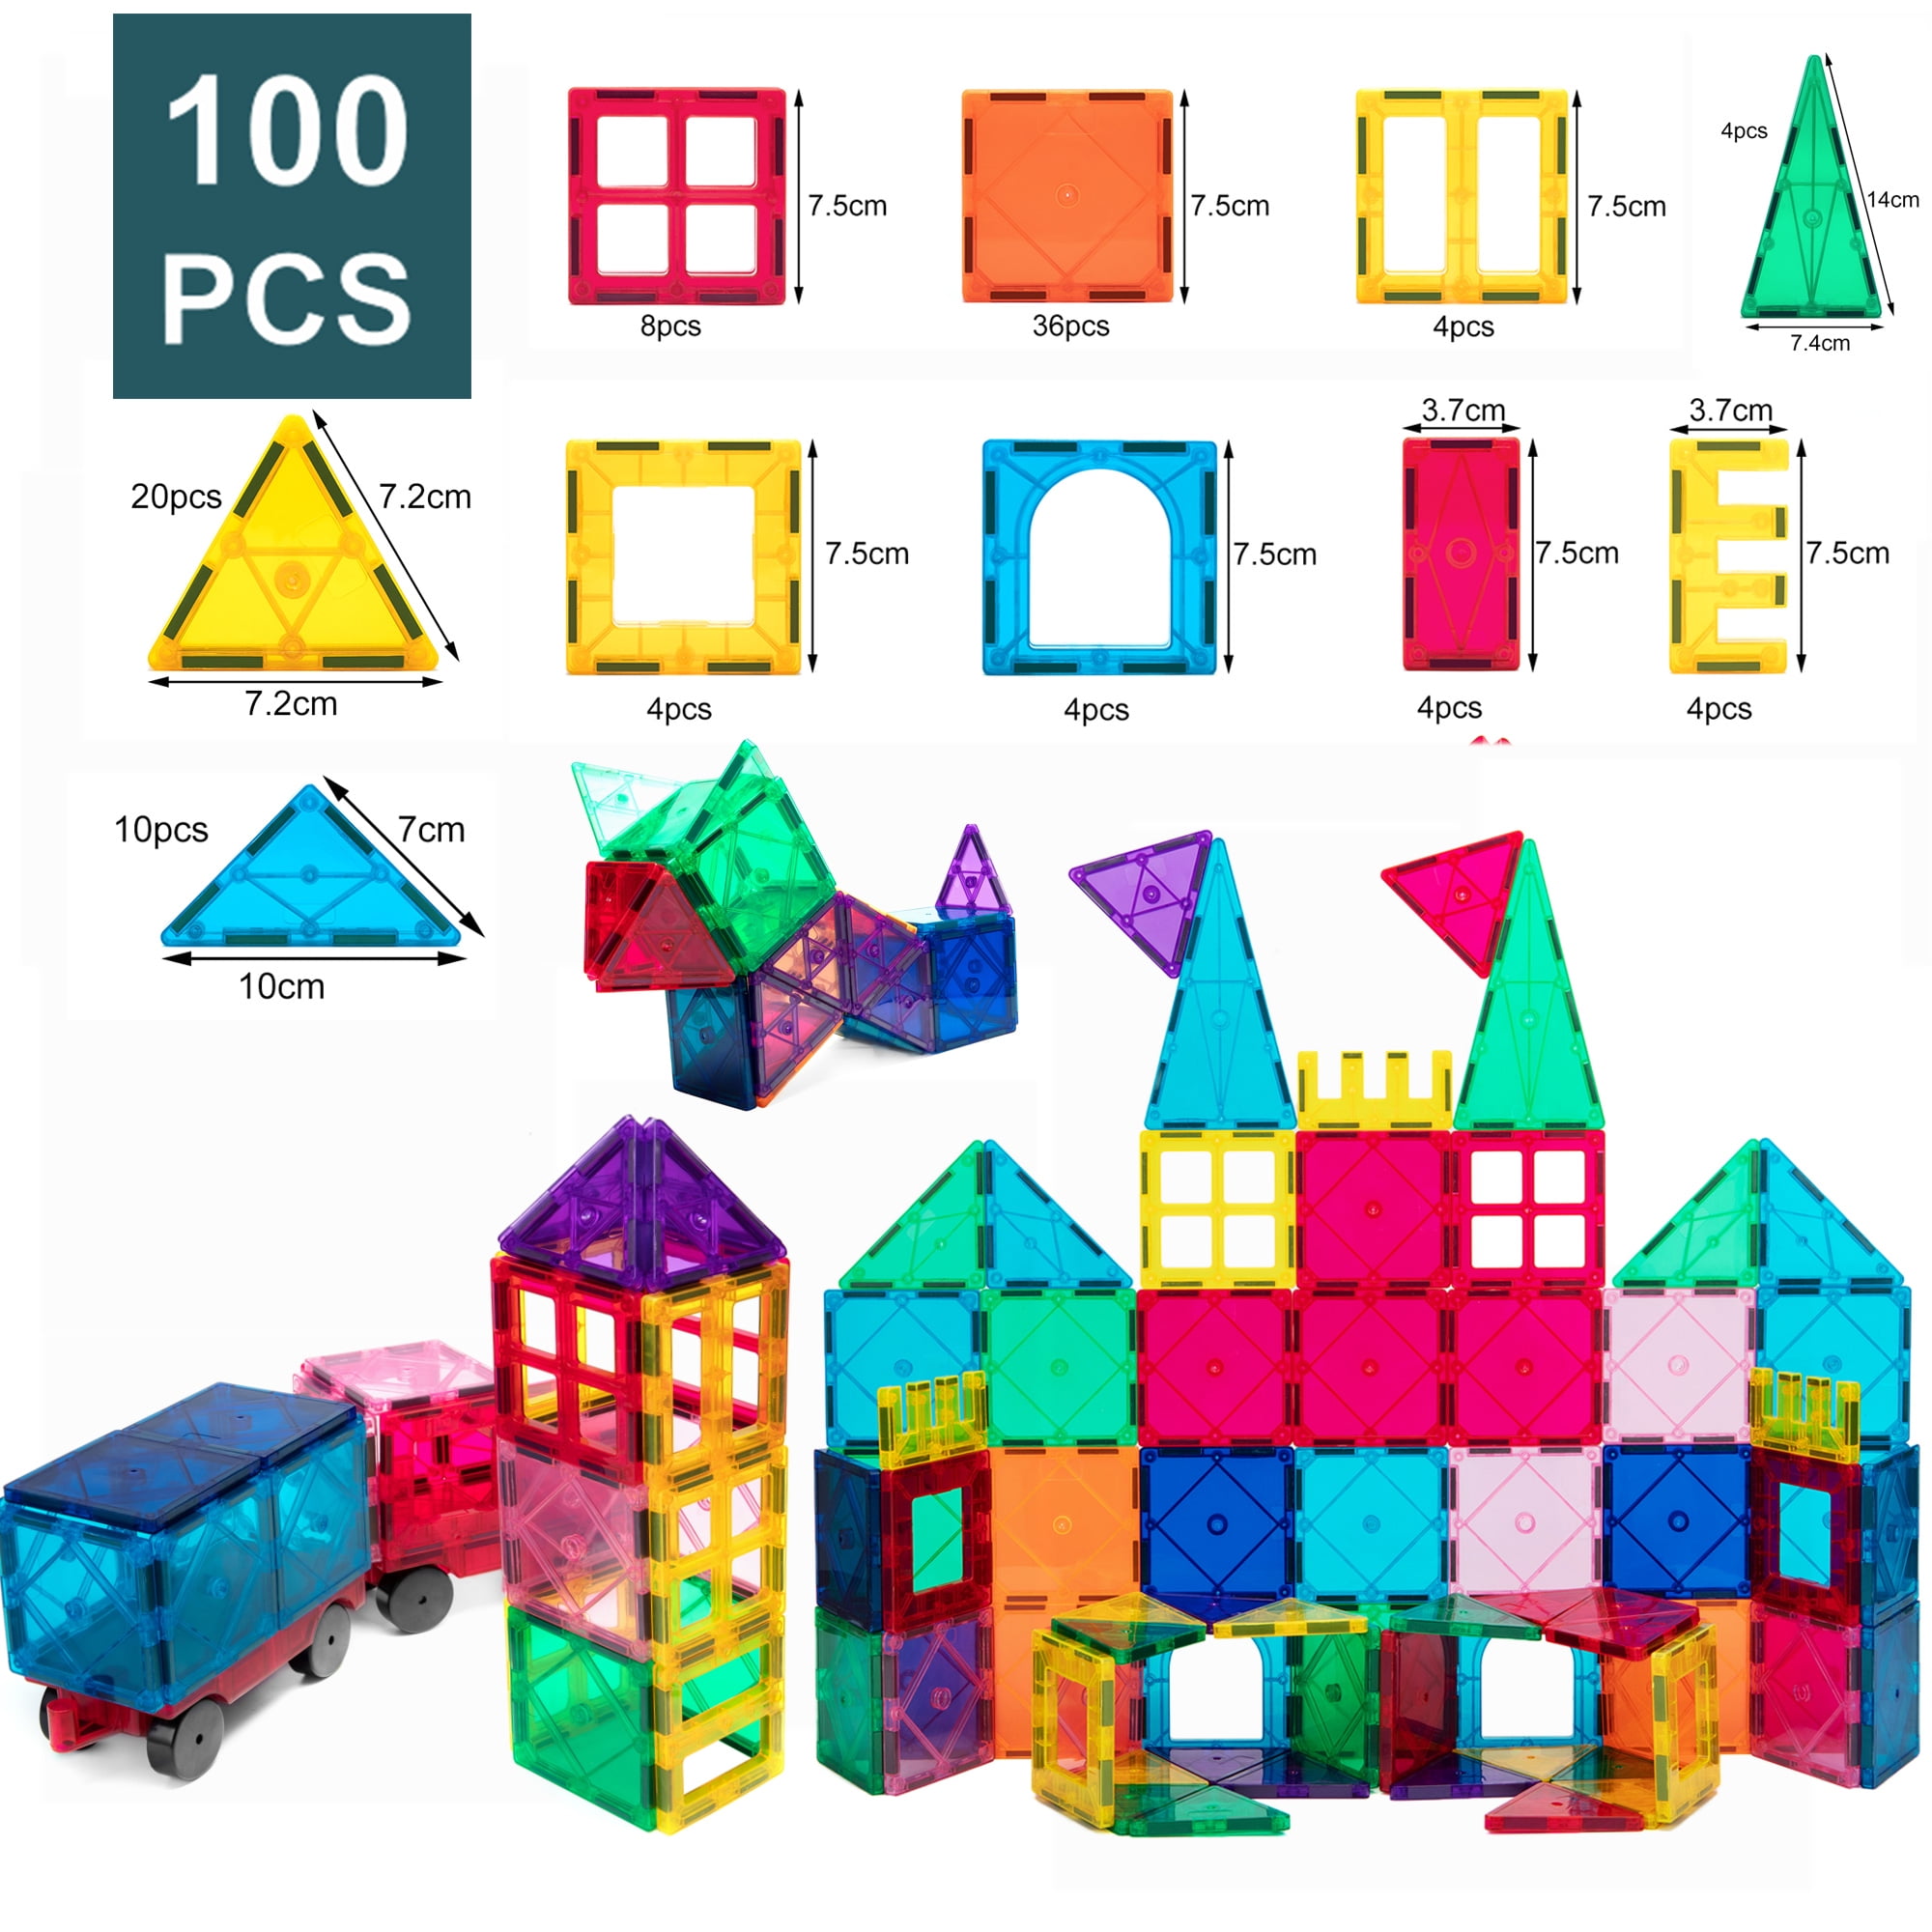 100 Pcs Magnetic Tiles Set Educational 3D Magnet Building Blocks Building  Construction Toys for Kids with Strong Magnets Creativity Imagination  Inspiration for 3 Years Old and Up 